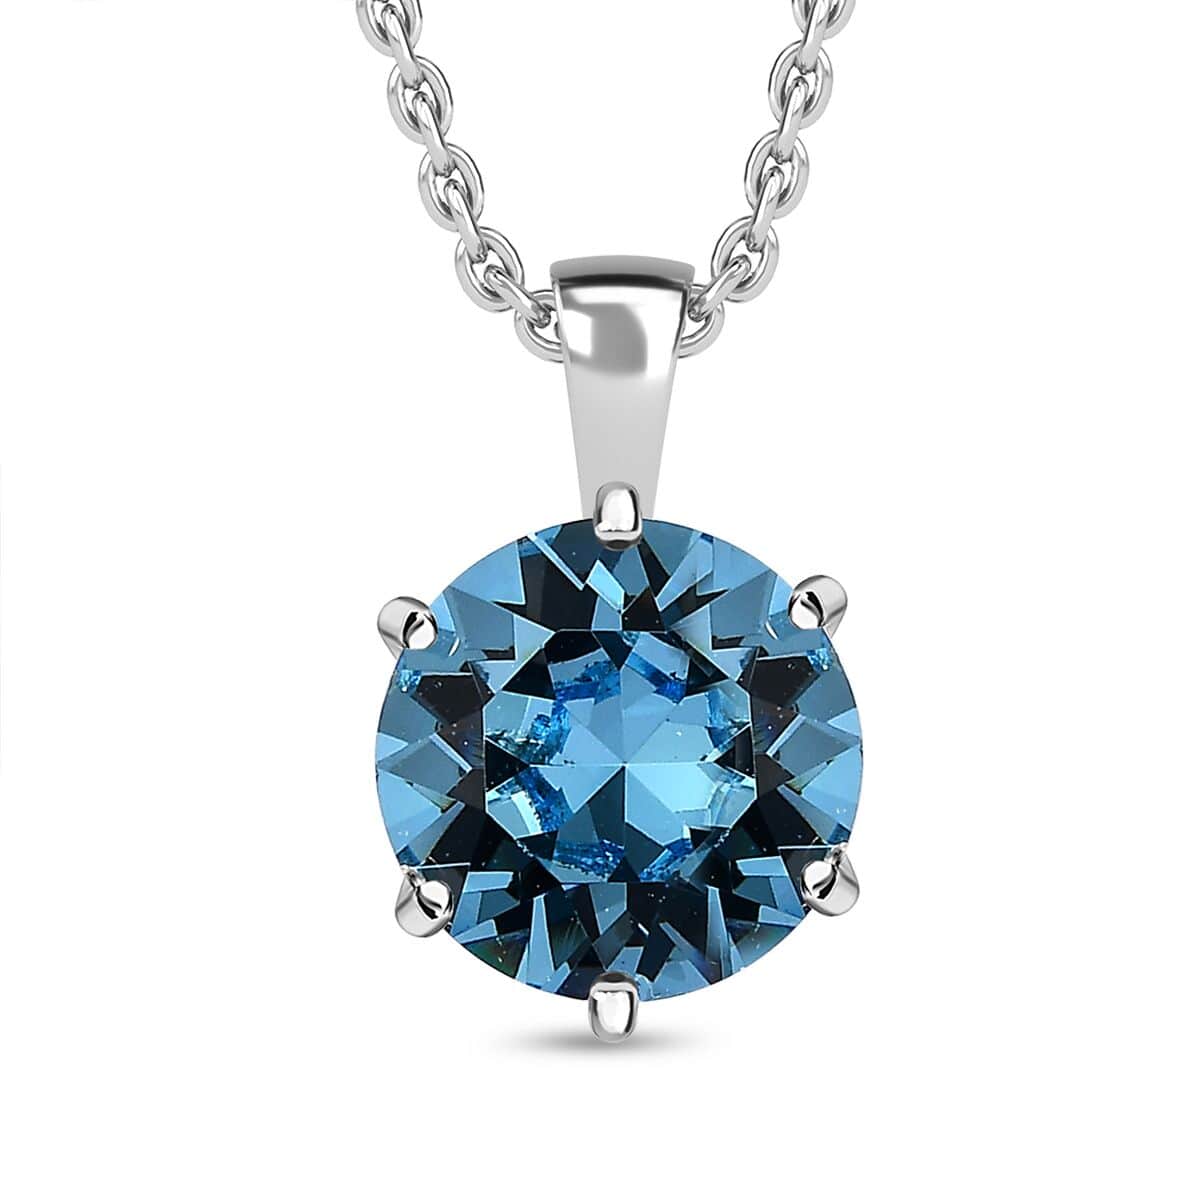 Designer Premium Aquamarine Color Austrian Crystal Solitaire Pendant in Sterling Silver with Stainless Steel Necklace 20 Inches image number 0